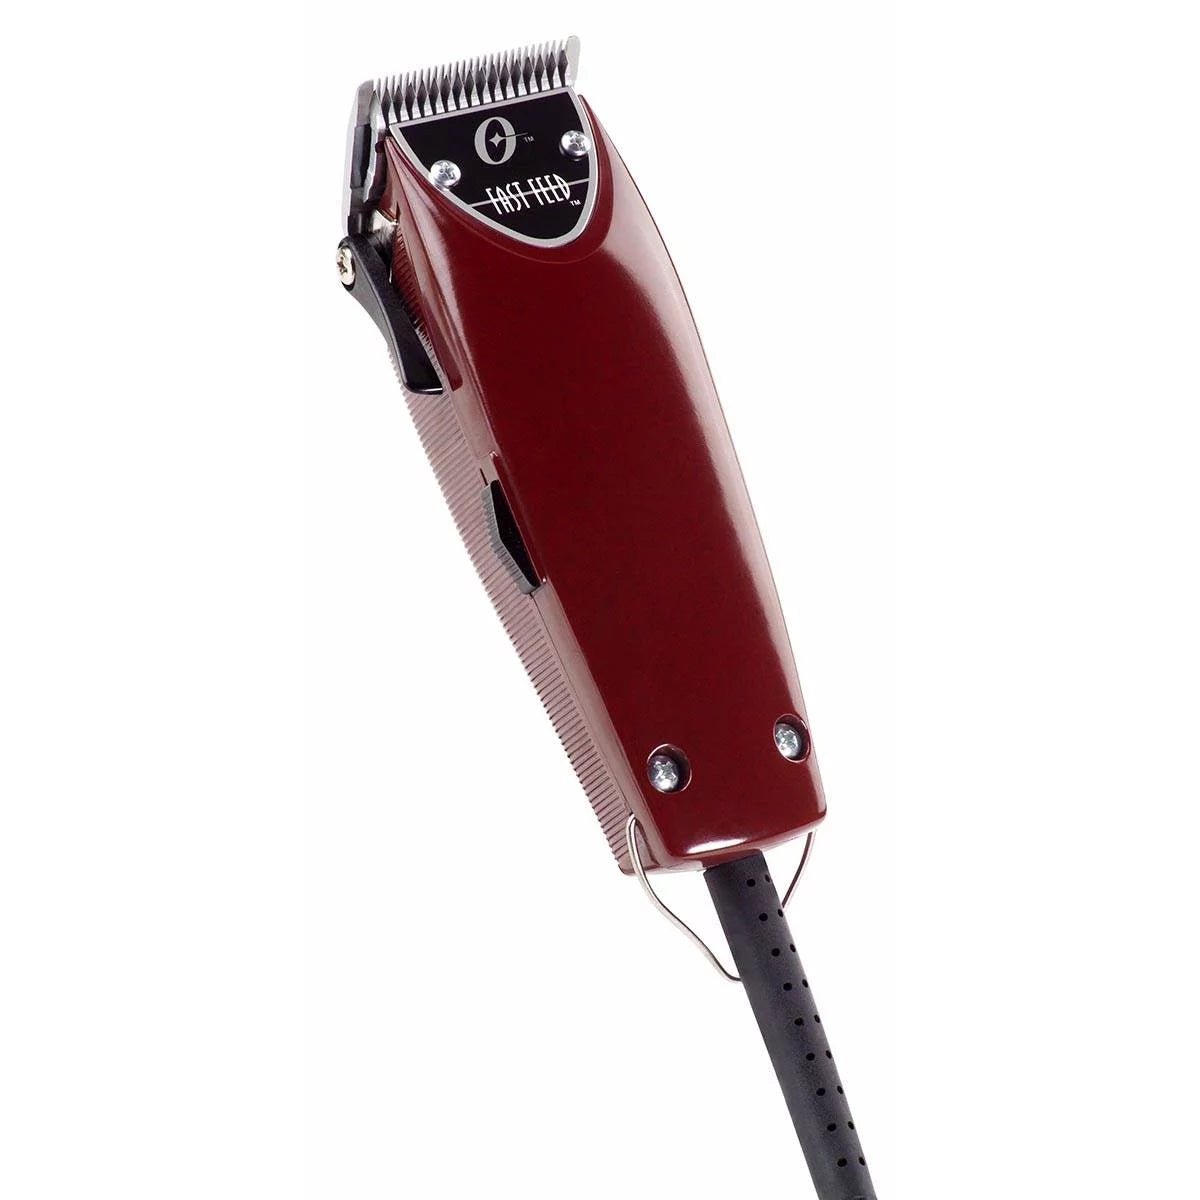 OSTER FAST FEED CLIPPER - Modern Barber Supply